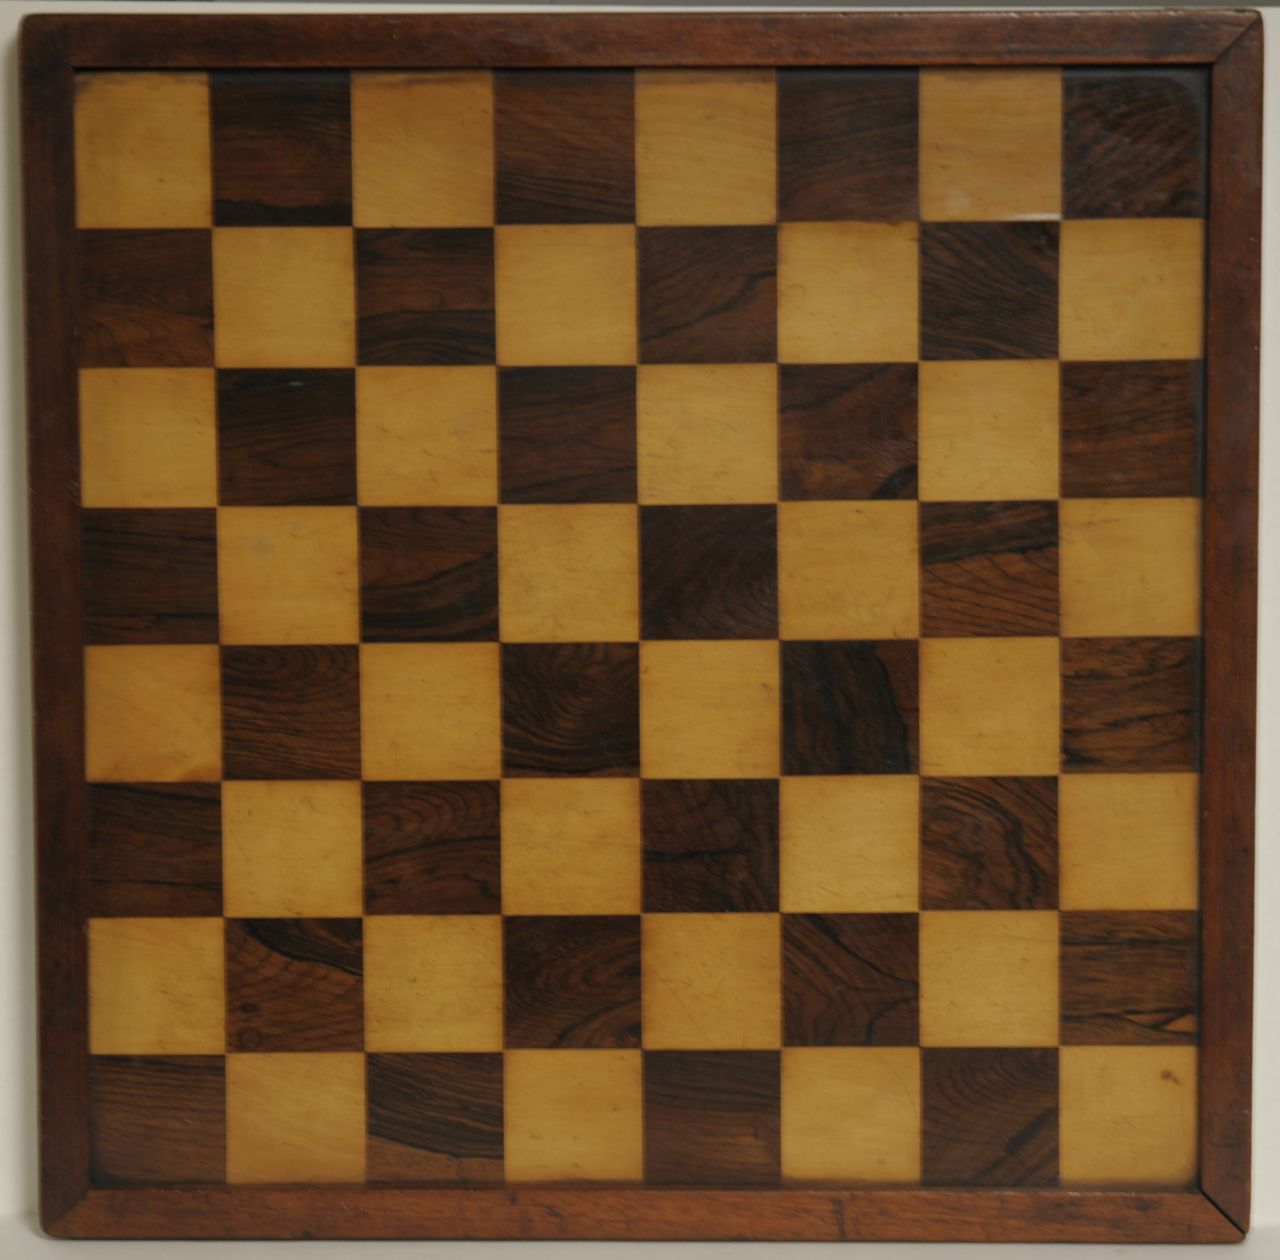 Schaakbord   | Schaakbord, A rosewood and boxwood veneered chess board, rosewood and boxwood 50.5 x 50.5 cm, executed in the late 19th century